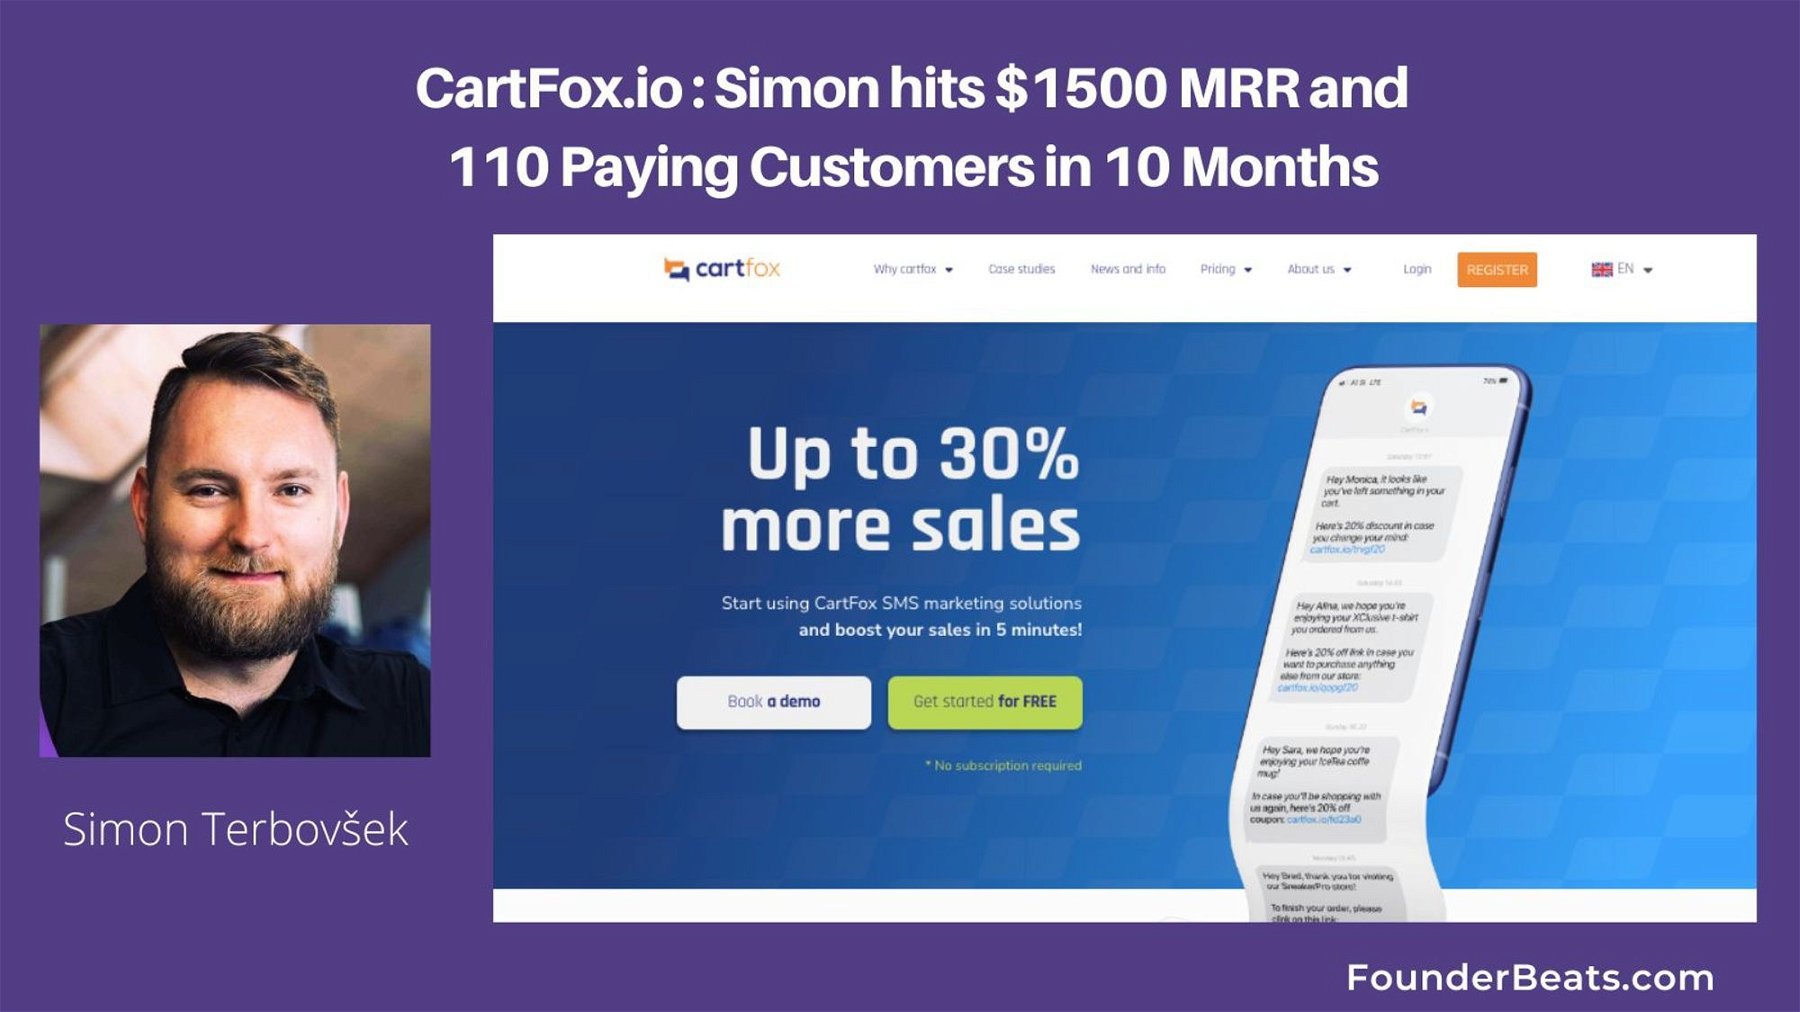 CartFox.io : Simon hits $1500 MRR and 110 Paying Customers in 10 months 